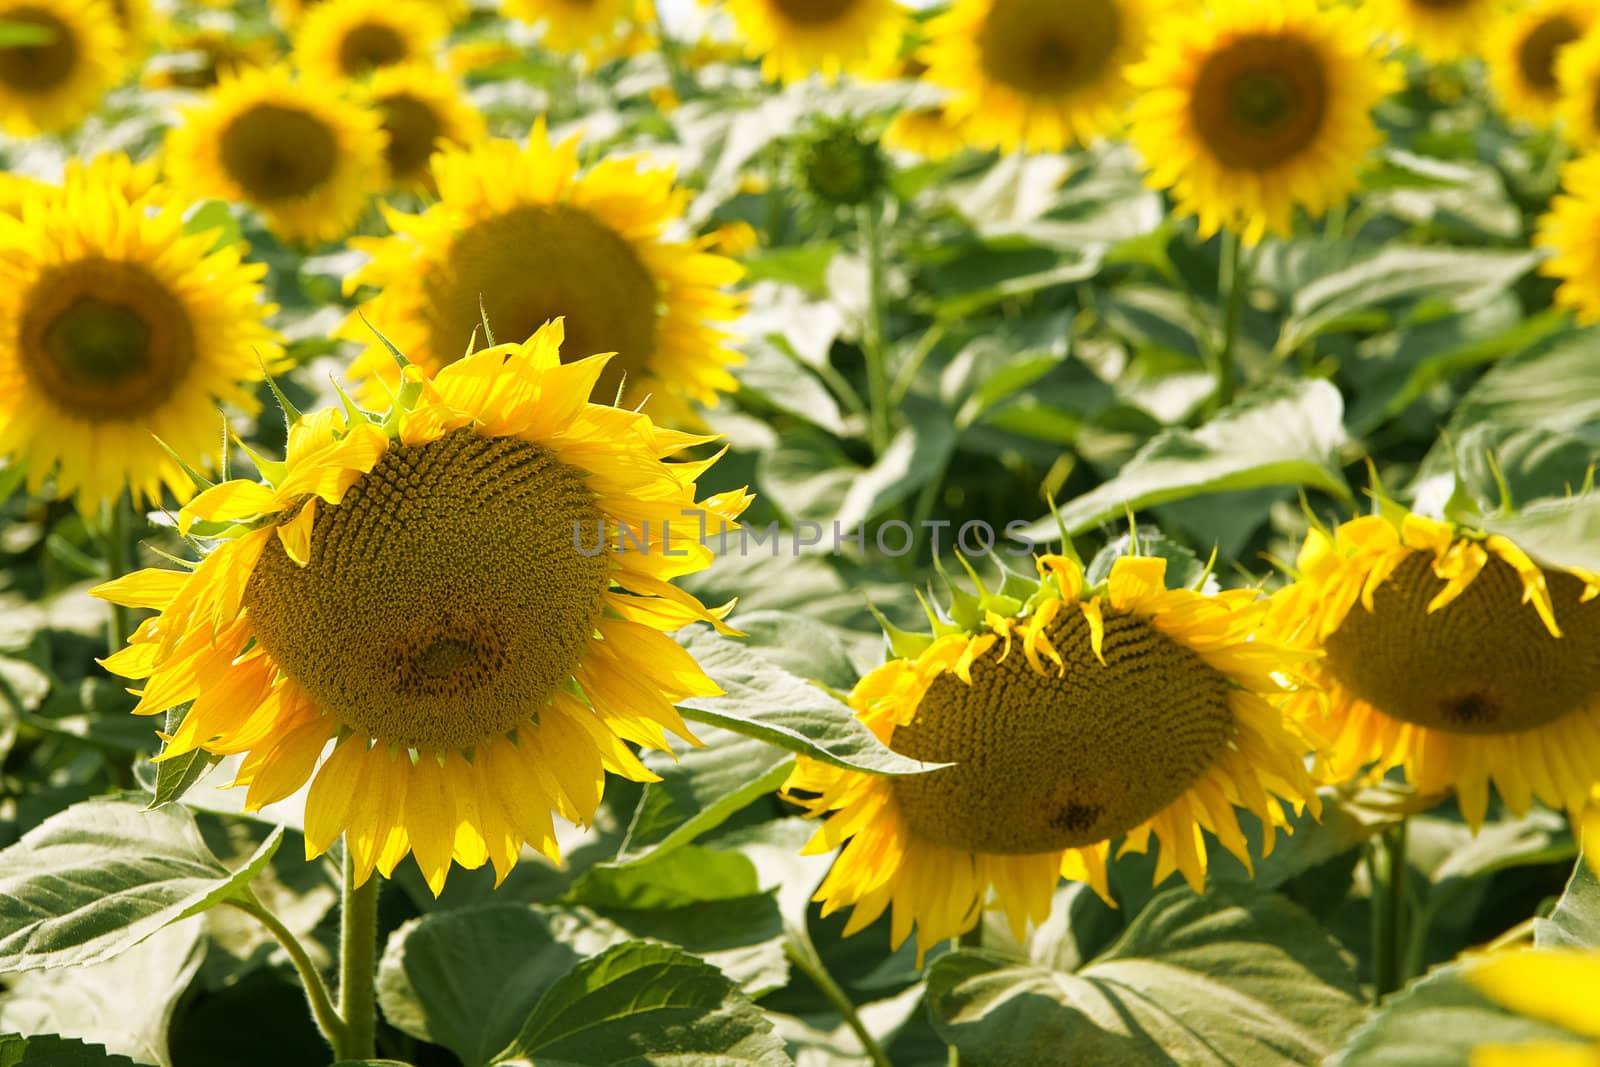 Ripe bright sunflowers growing on a farmer field in the late summer